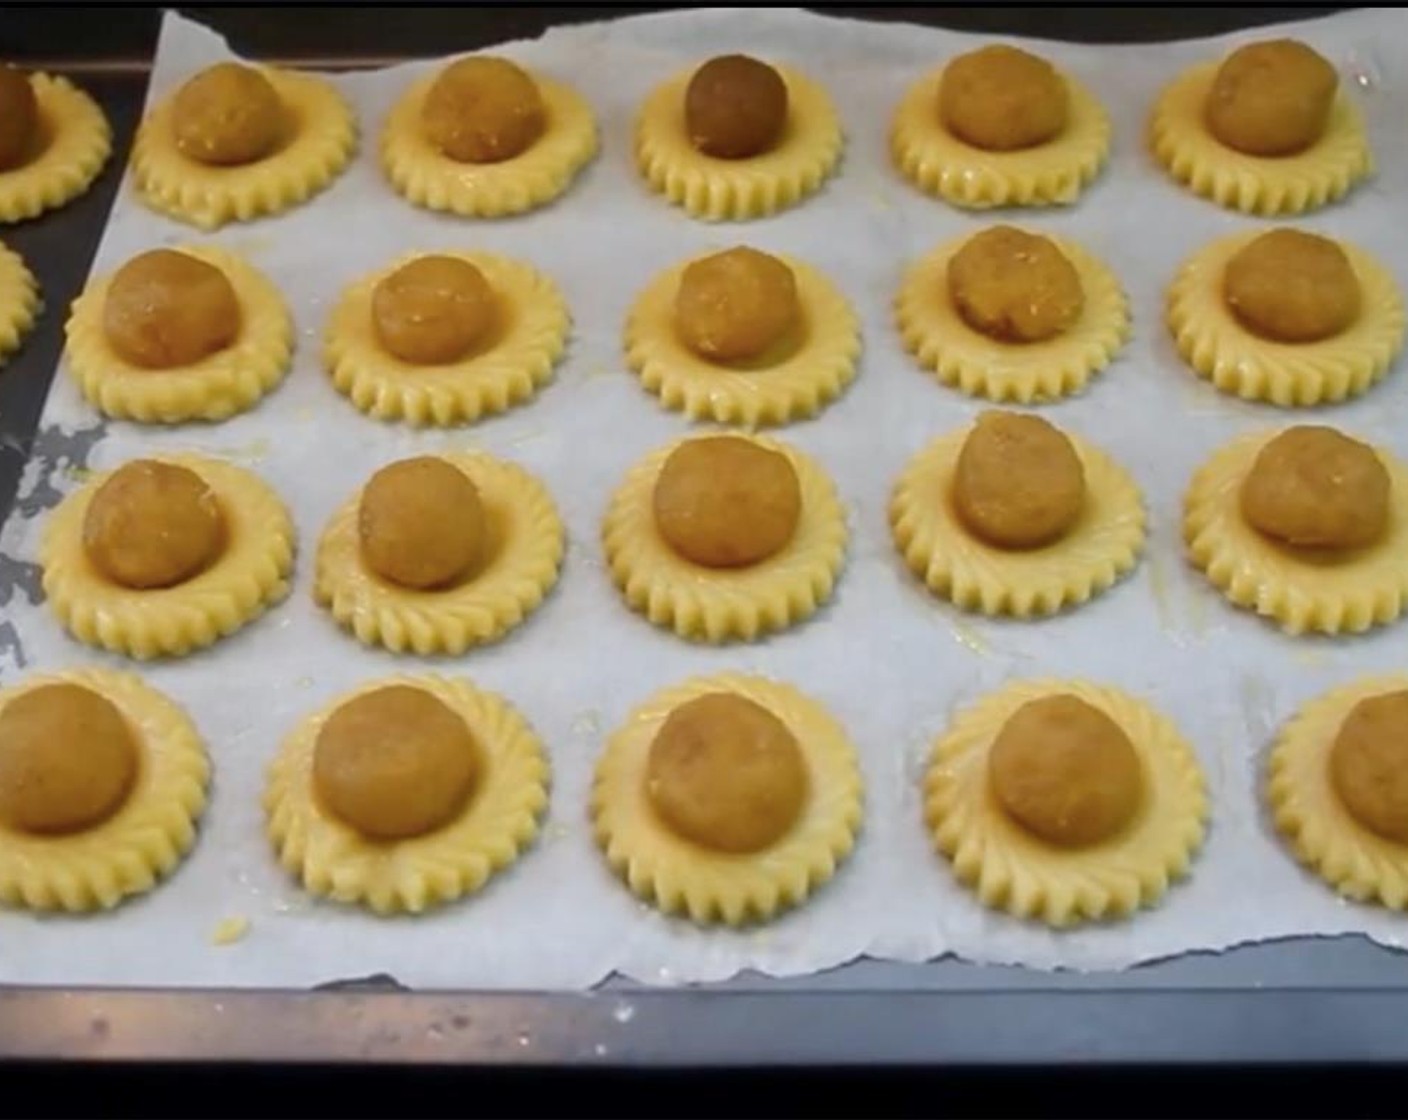 step 11 Combine Egg (1) and Water (1 Tbsp) to make egg wash. Brush the mixture onto each cookie. Top each cookie with a ball of pineapple filling. Let sit in the fridge while you preheat the oven to 170 degrees C (340 degrees F).